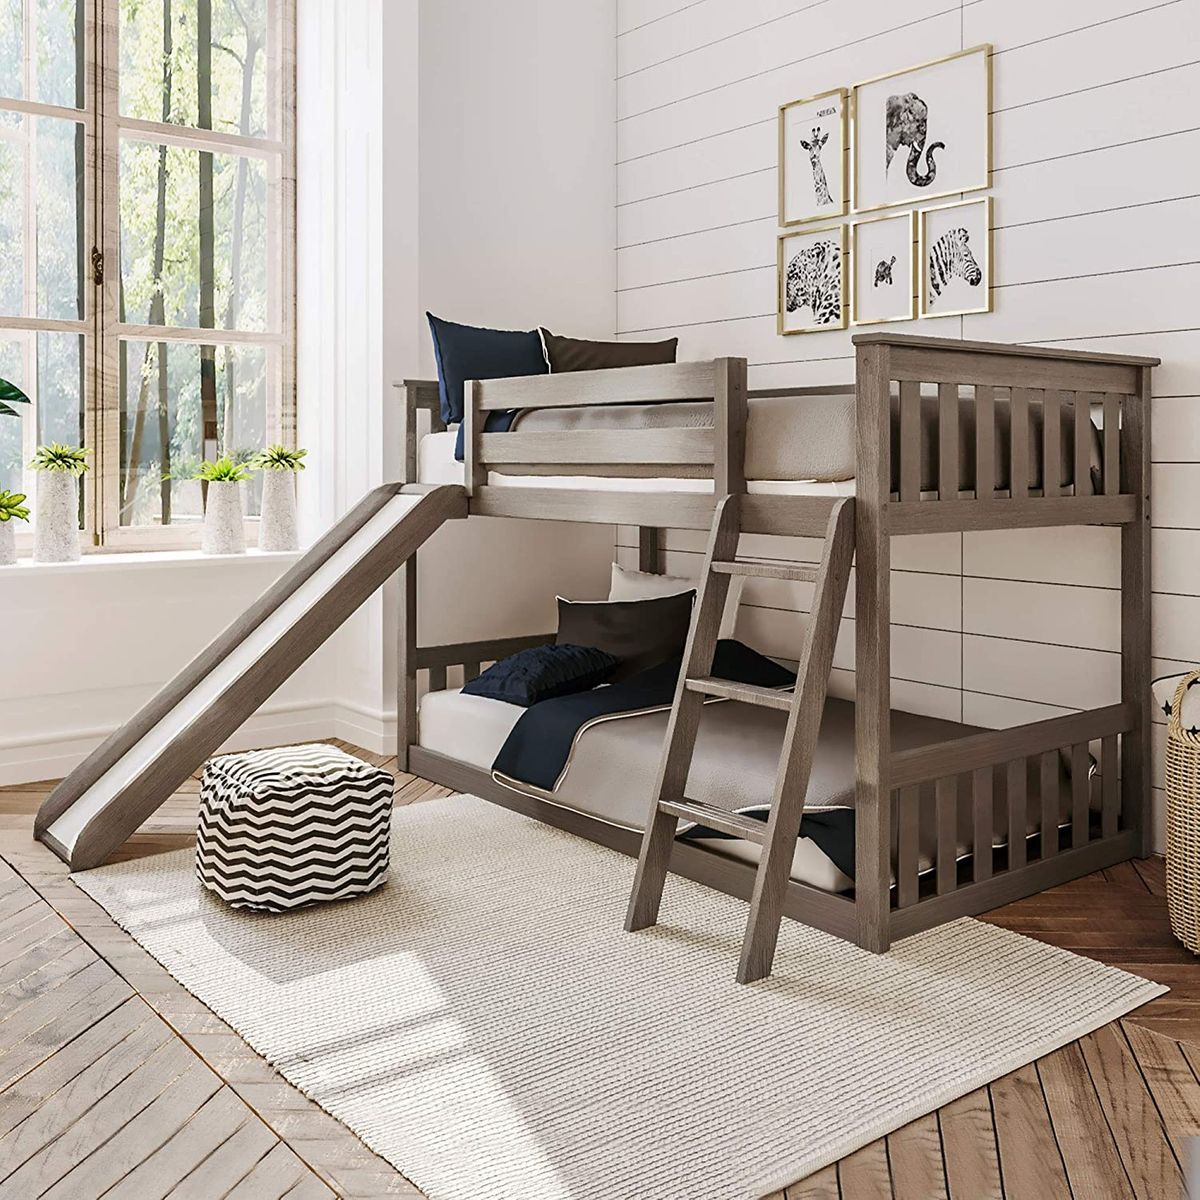 8 Best Bunk Beds 2020 The Strategist, 4 Bunk Beds In One